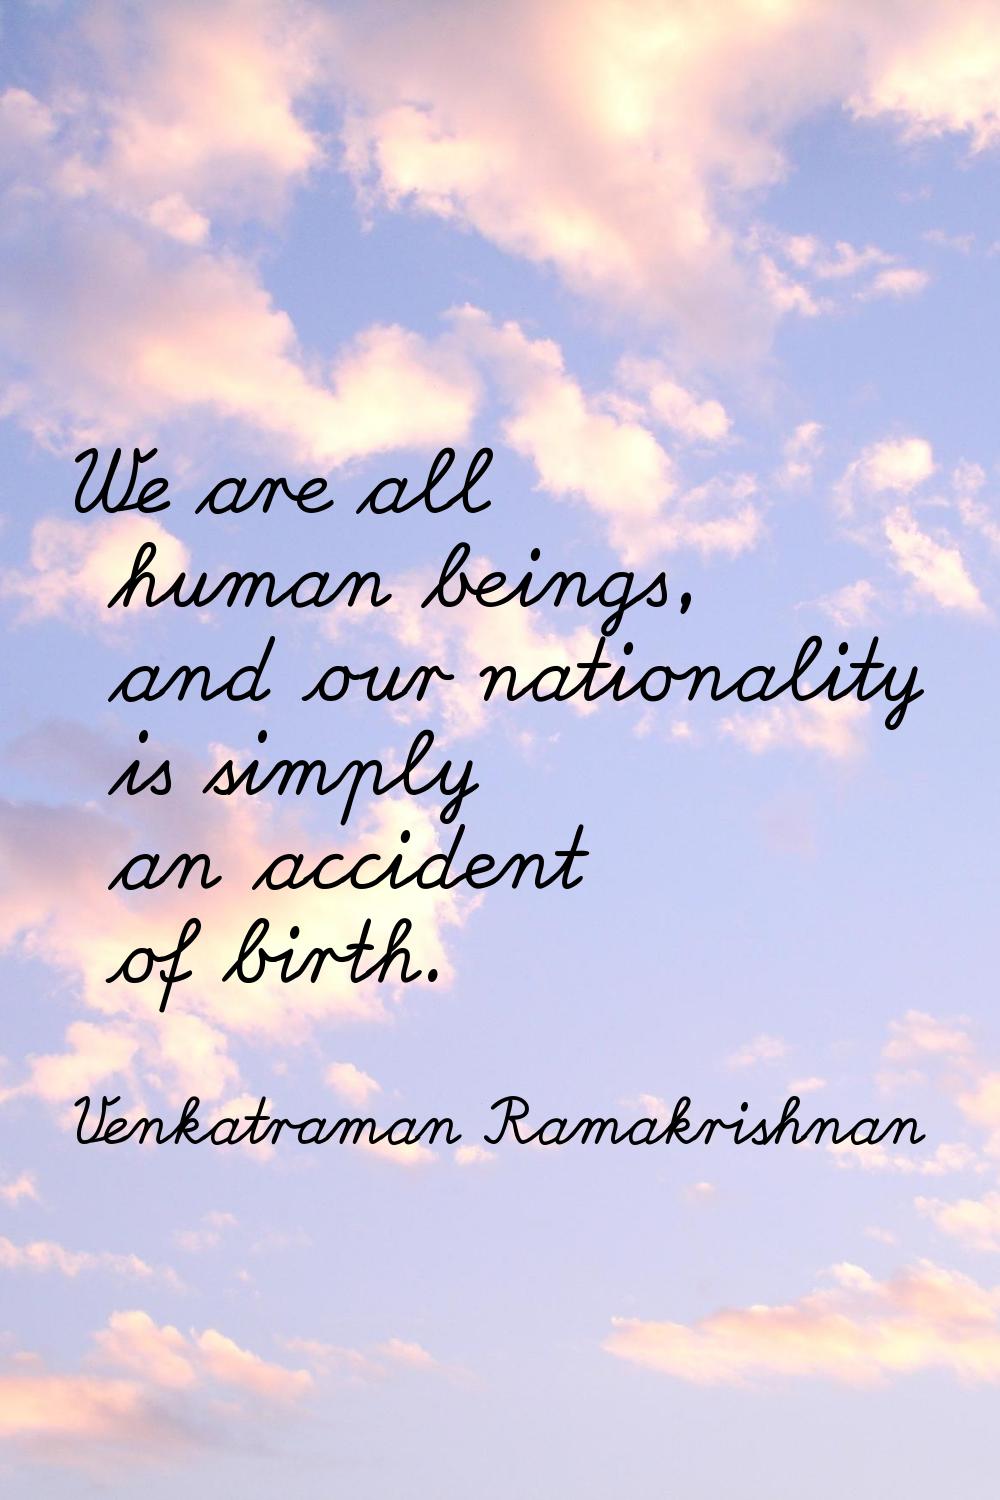 We are all human beings, and our nationality is simply an accident of birth.